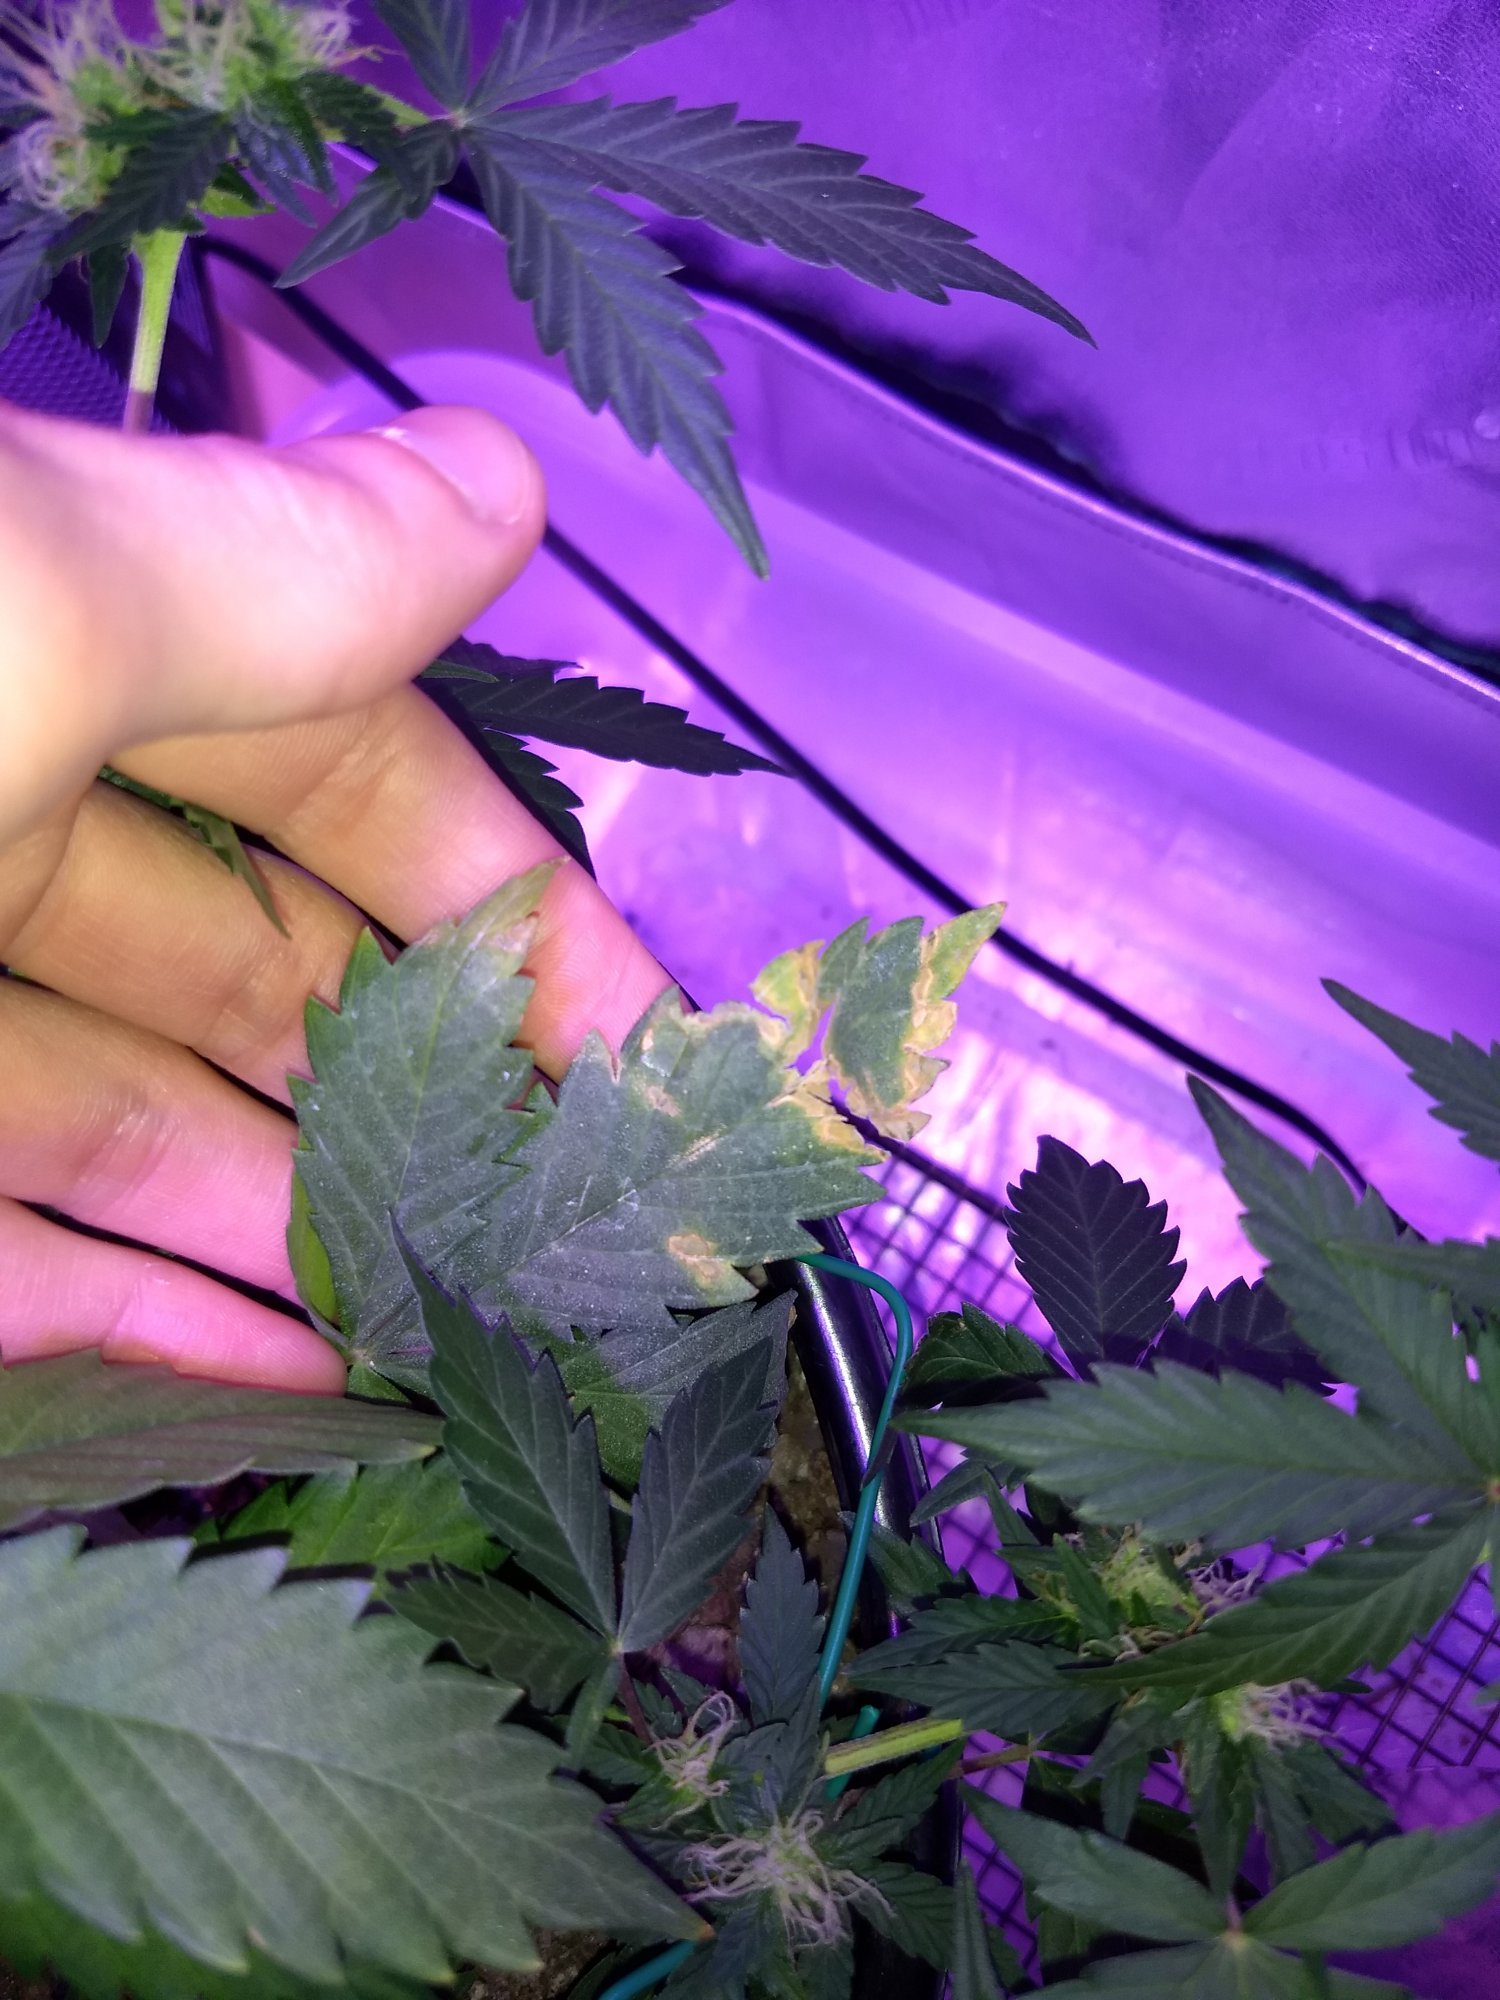 Trouble identifying cause of yellowing and browning leaves 3